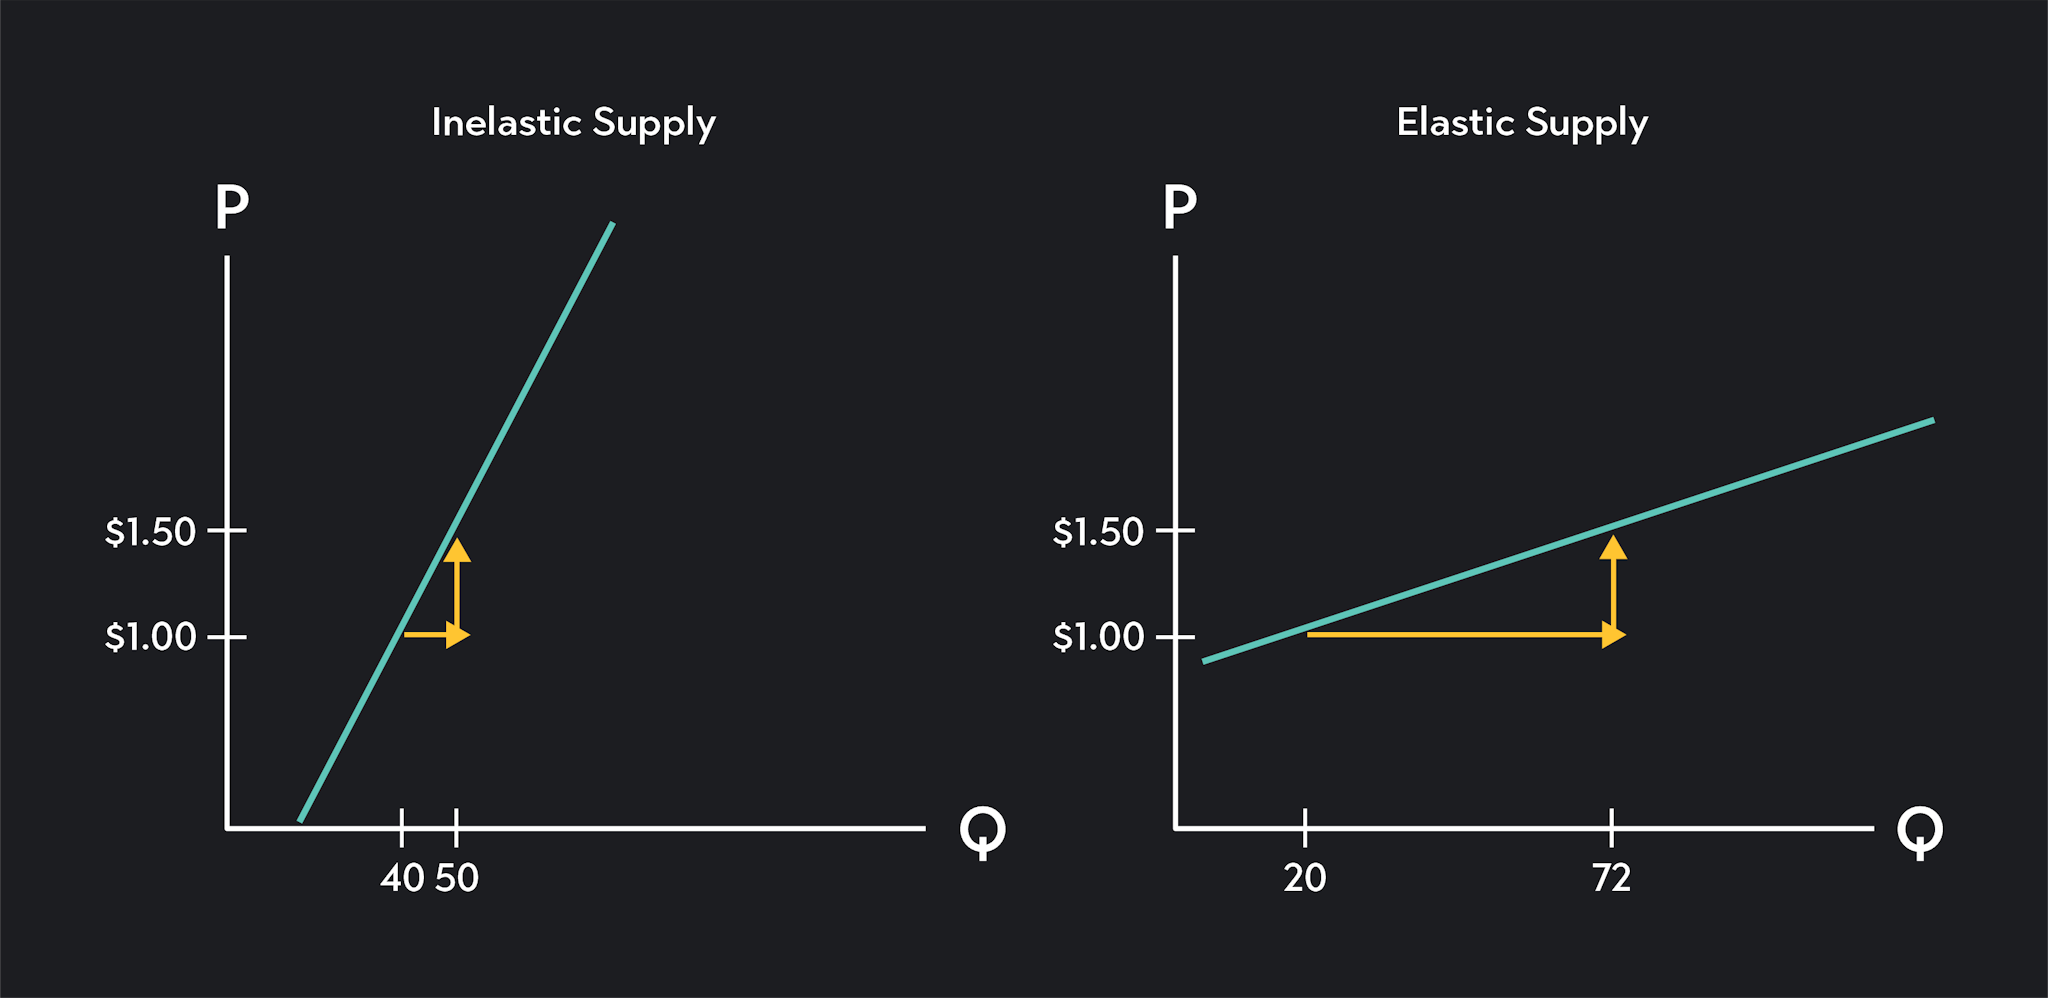 Graphic showing elastic supply curve and inelastic supply curve